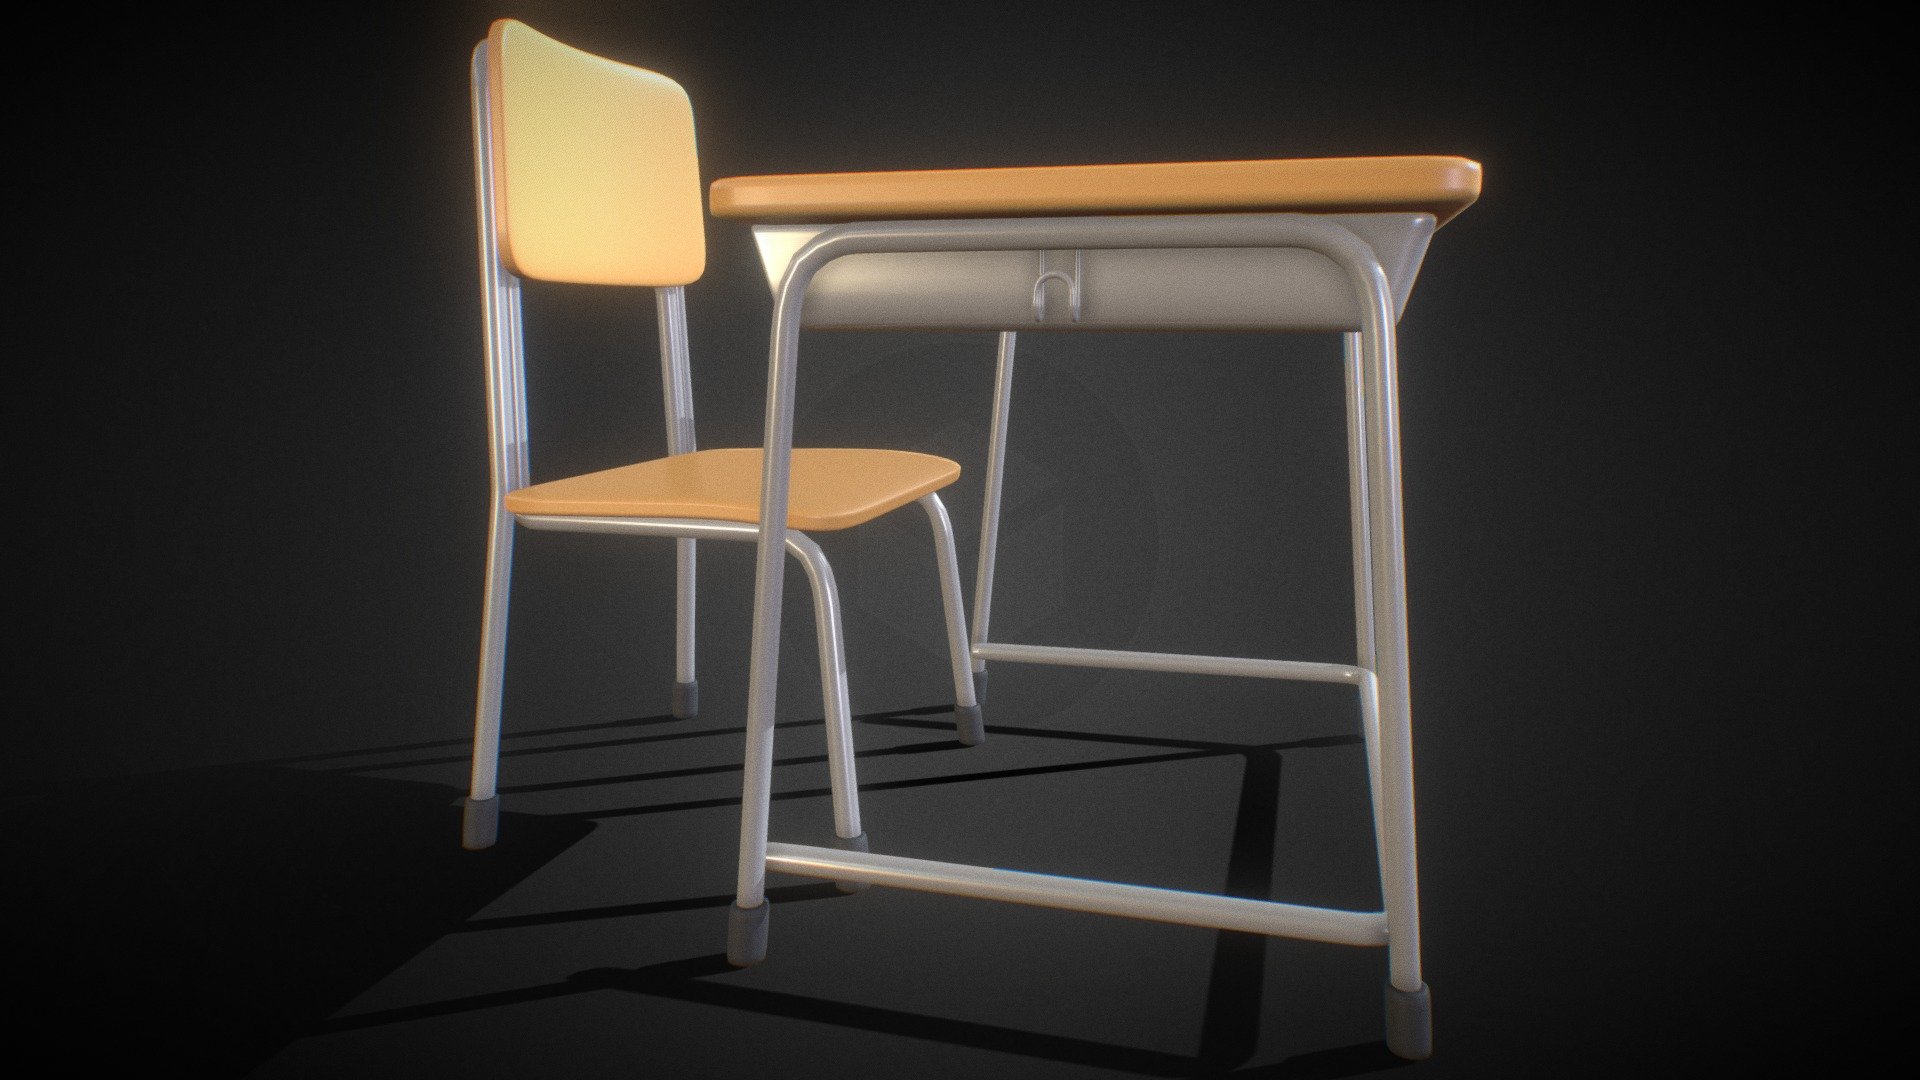 Student desk and chair based on japanese elementary school design at real scale. Includes wooden main parts holded with metal supports protected by rubber covers on each leg. The school desk features a wide drawer for books and material and a hook at each side for backpack, clothes or accesories holding

Subdivision modifiers are unapplied, so poly count can be easily adjusted to the project needs.

💮 If you liked my work remember to Follow me and Share! 🧸 💬 Commissions Open: ko-fi.com/Tsubasa_Art ☕🌸 !! - VR School Desk & Chair set - Buy Royalty Free 3D model by Tsubasa ツバサ (@Tsubasa_Art) 3d model